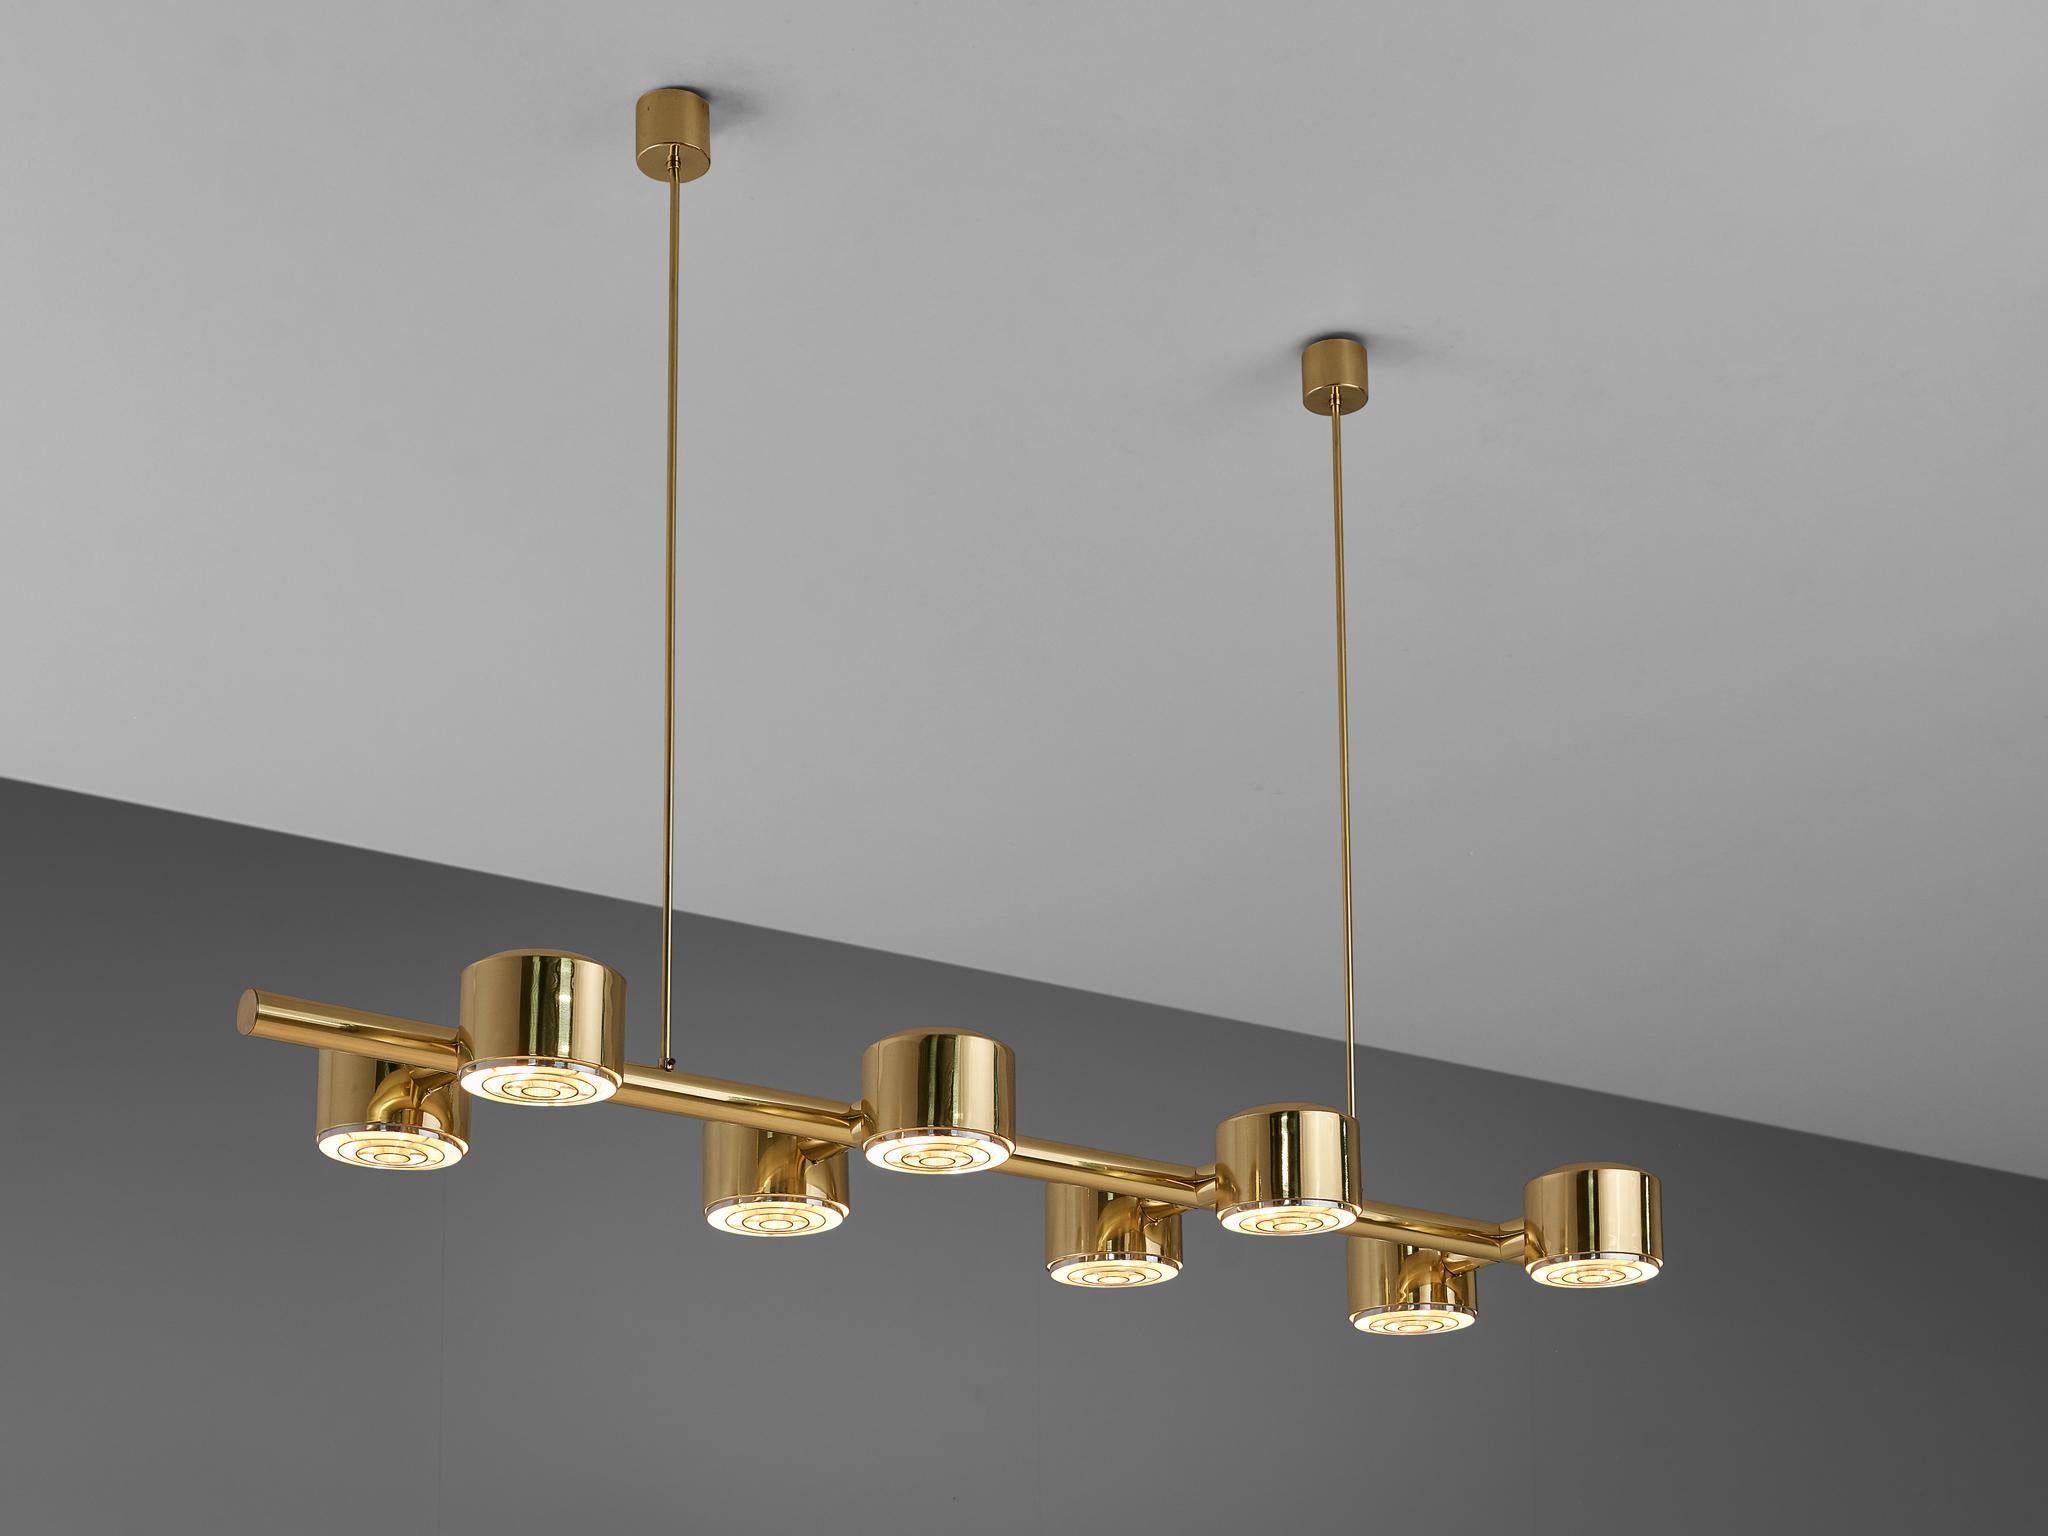 Hans-Agne Jakobsson, T 746/8 chandelier in brass, glass, Sweden, 1960s

Hans-Agne Jakobsson designed this chandelier with eight cylindrical lightbulbs paired on a line. The brass reflects the light vertically whilst the light itself is emitted on a